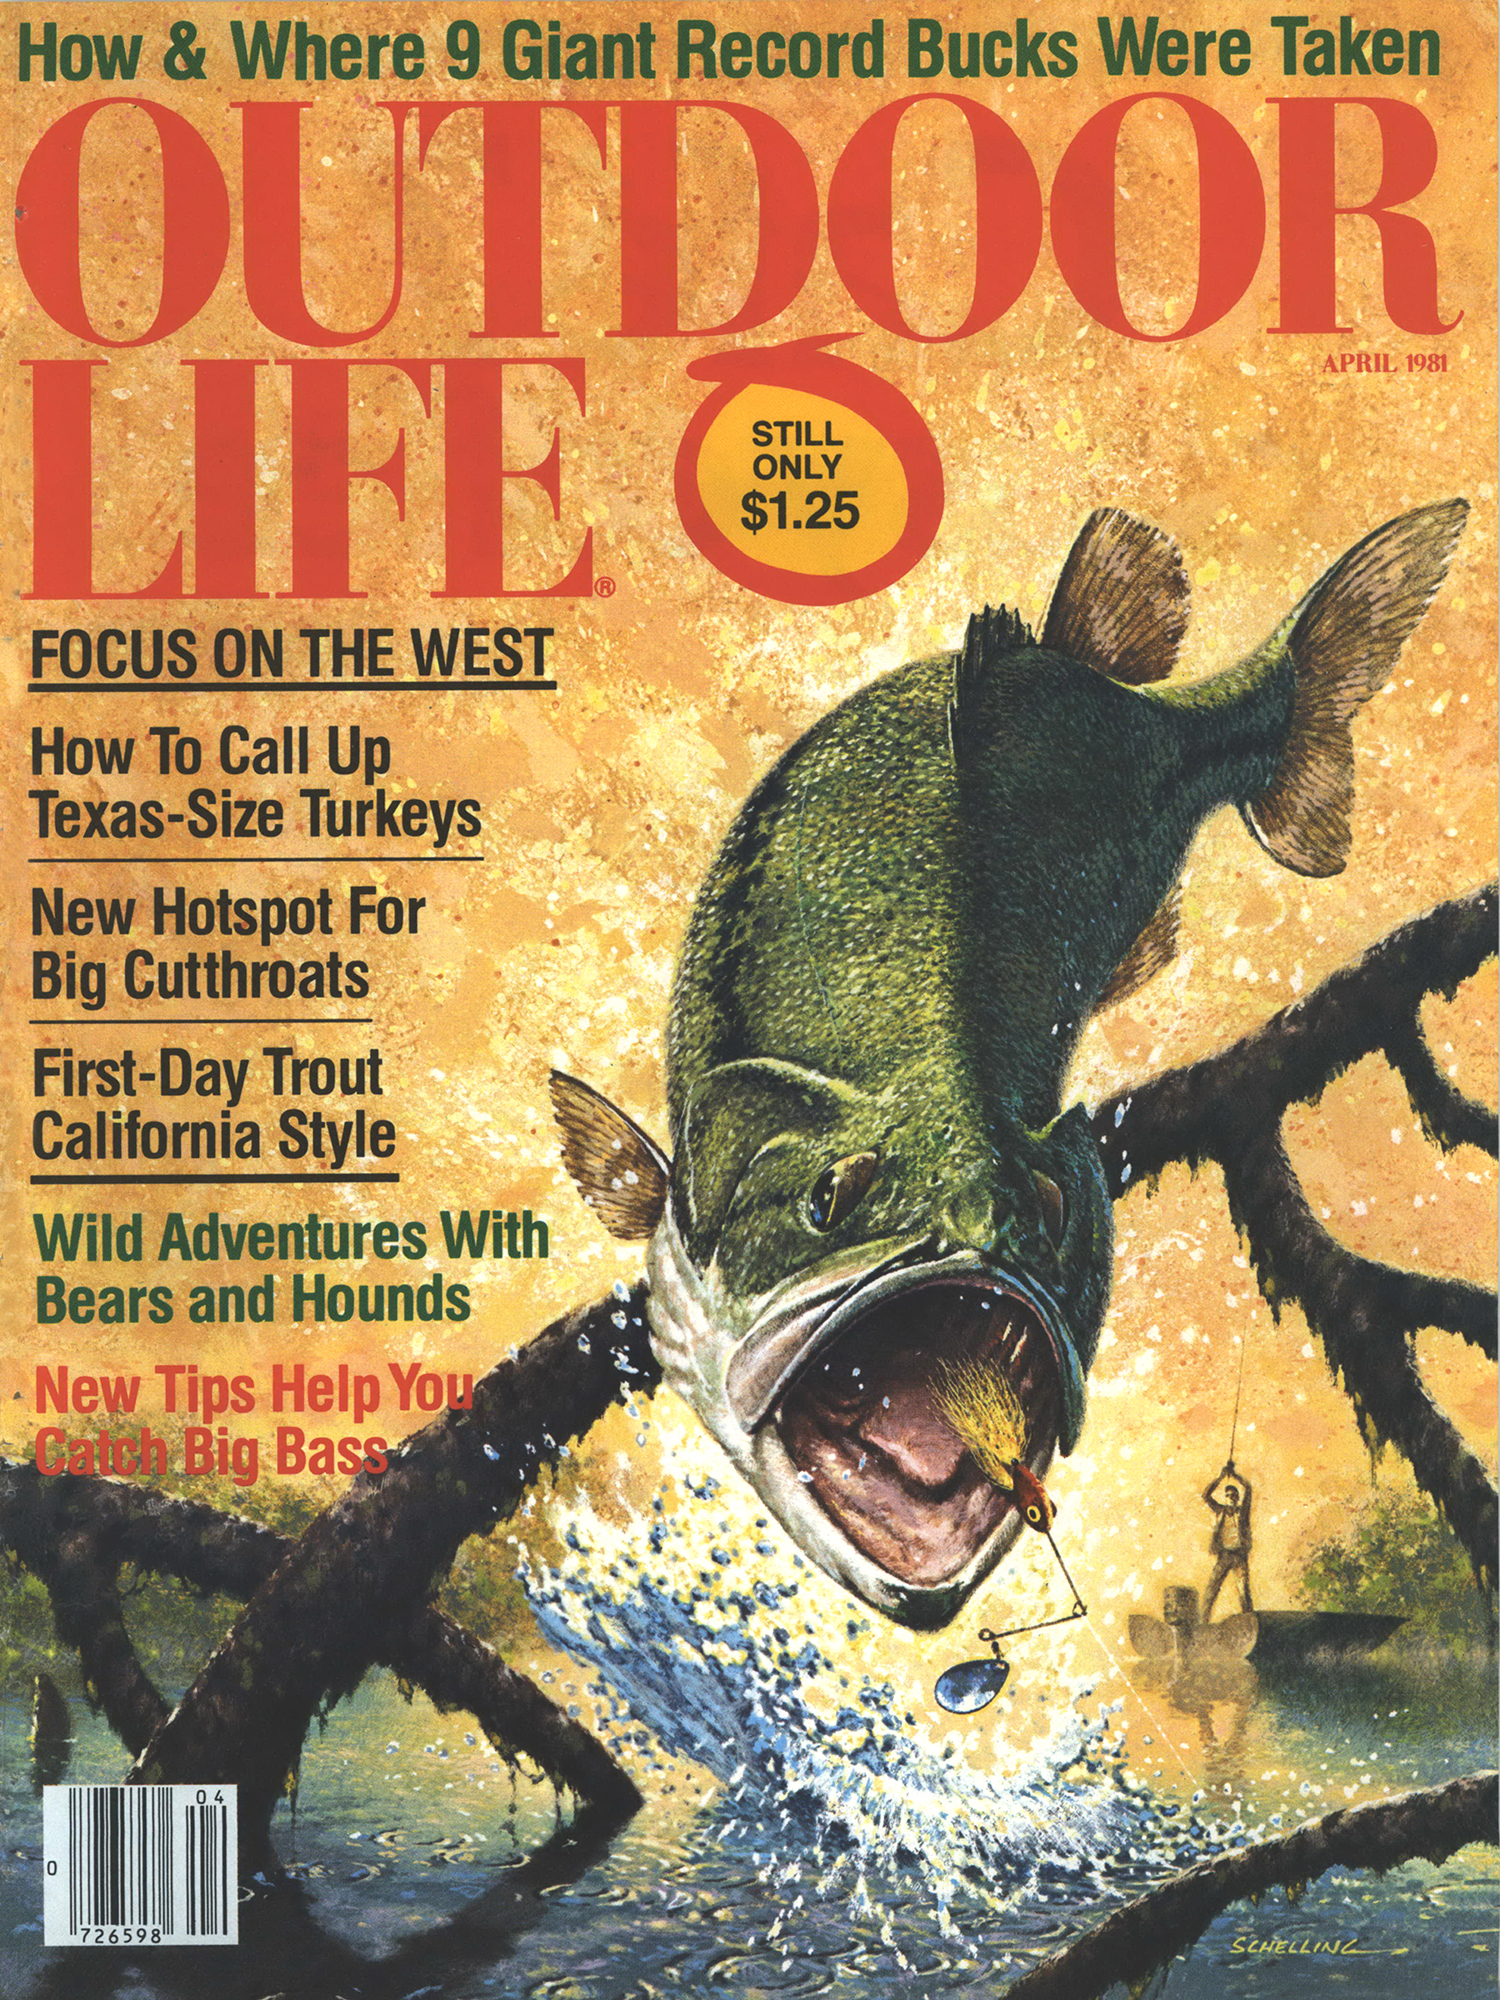 The cover of the April 1981 issue, where this story first appeared. Illustration by George Luther Schelling.